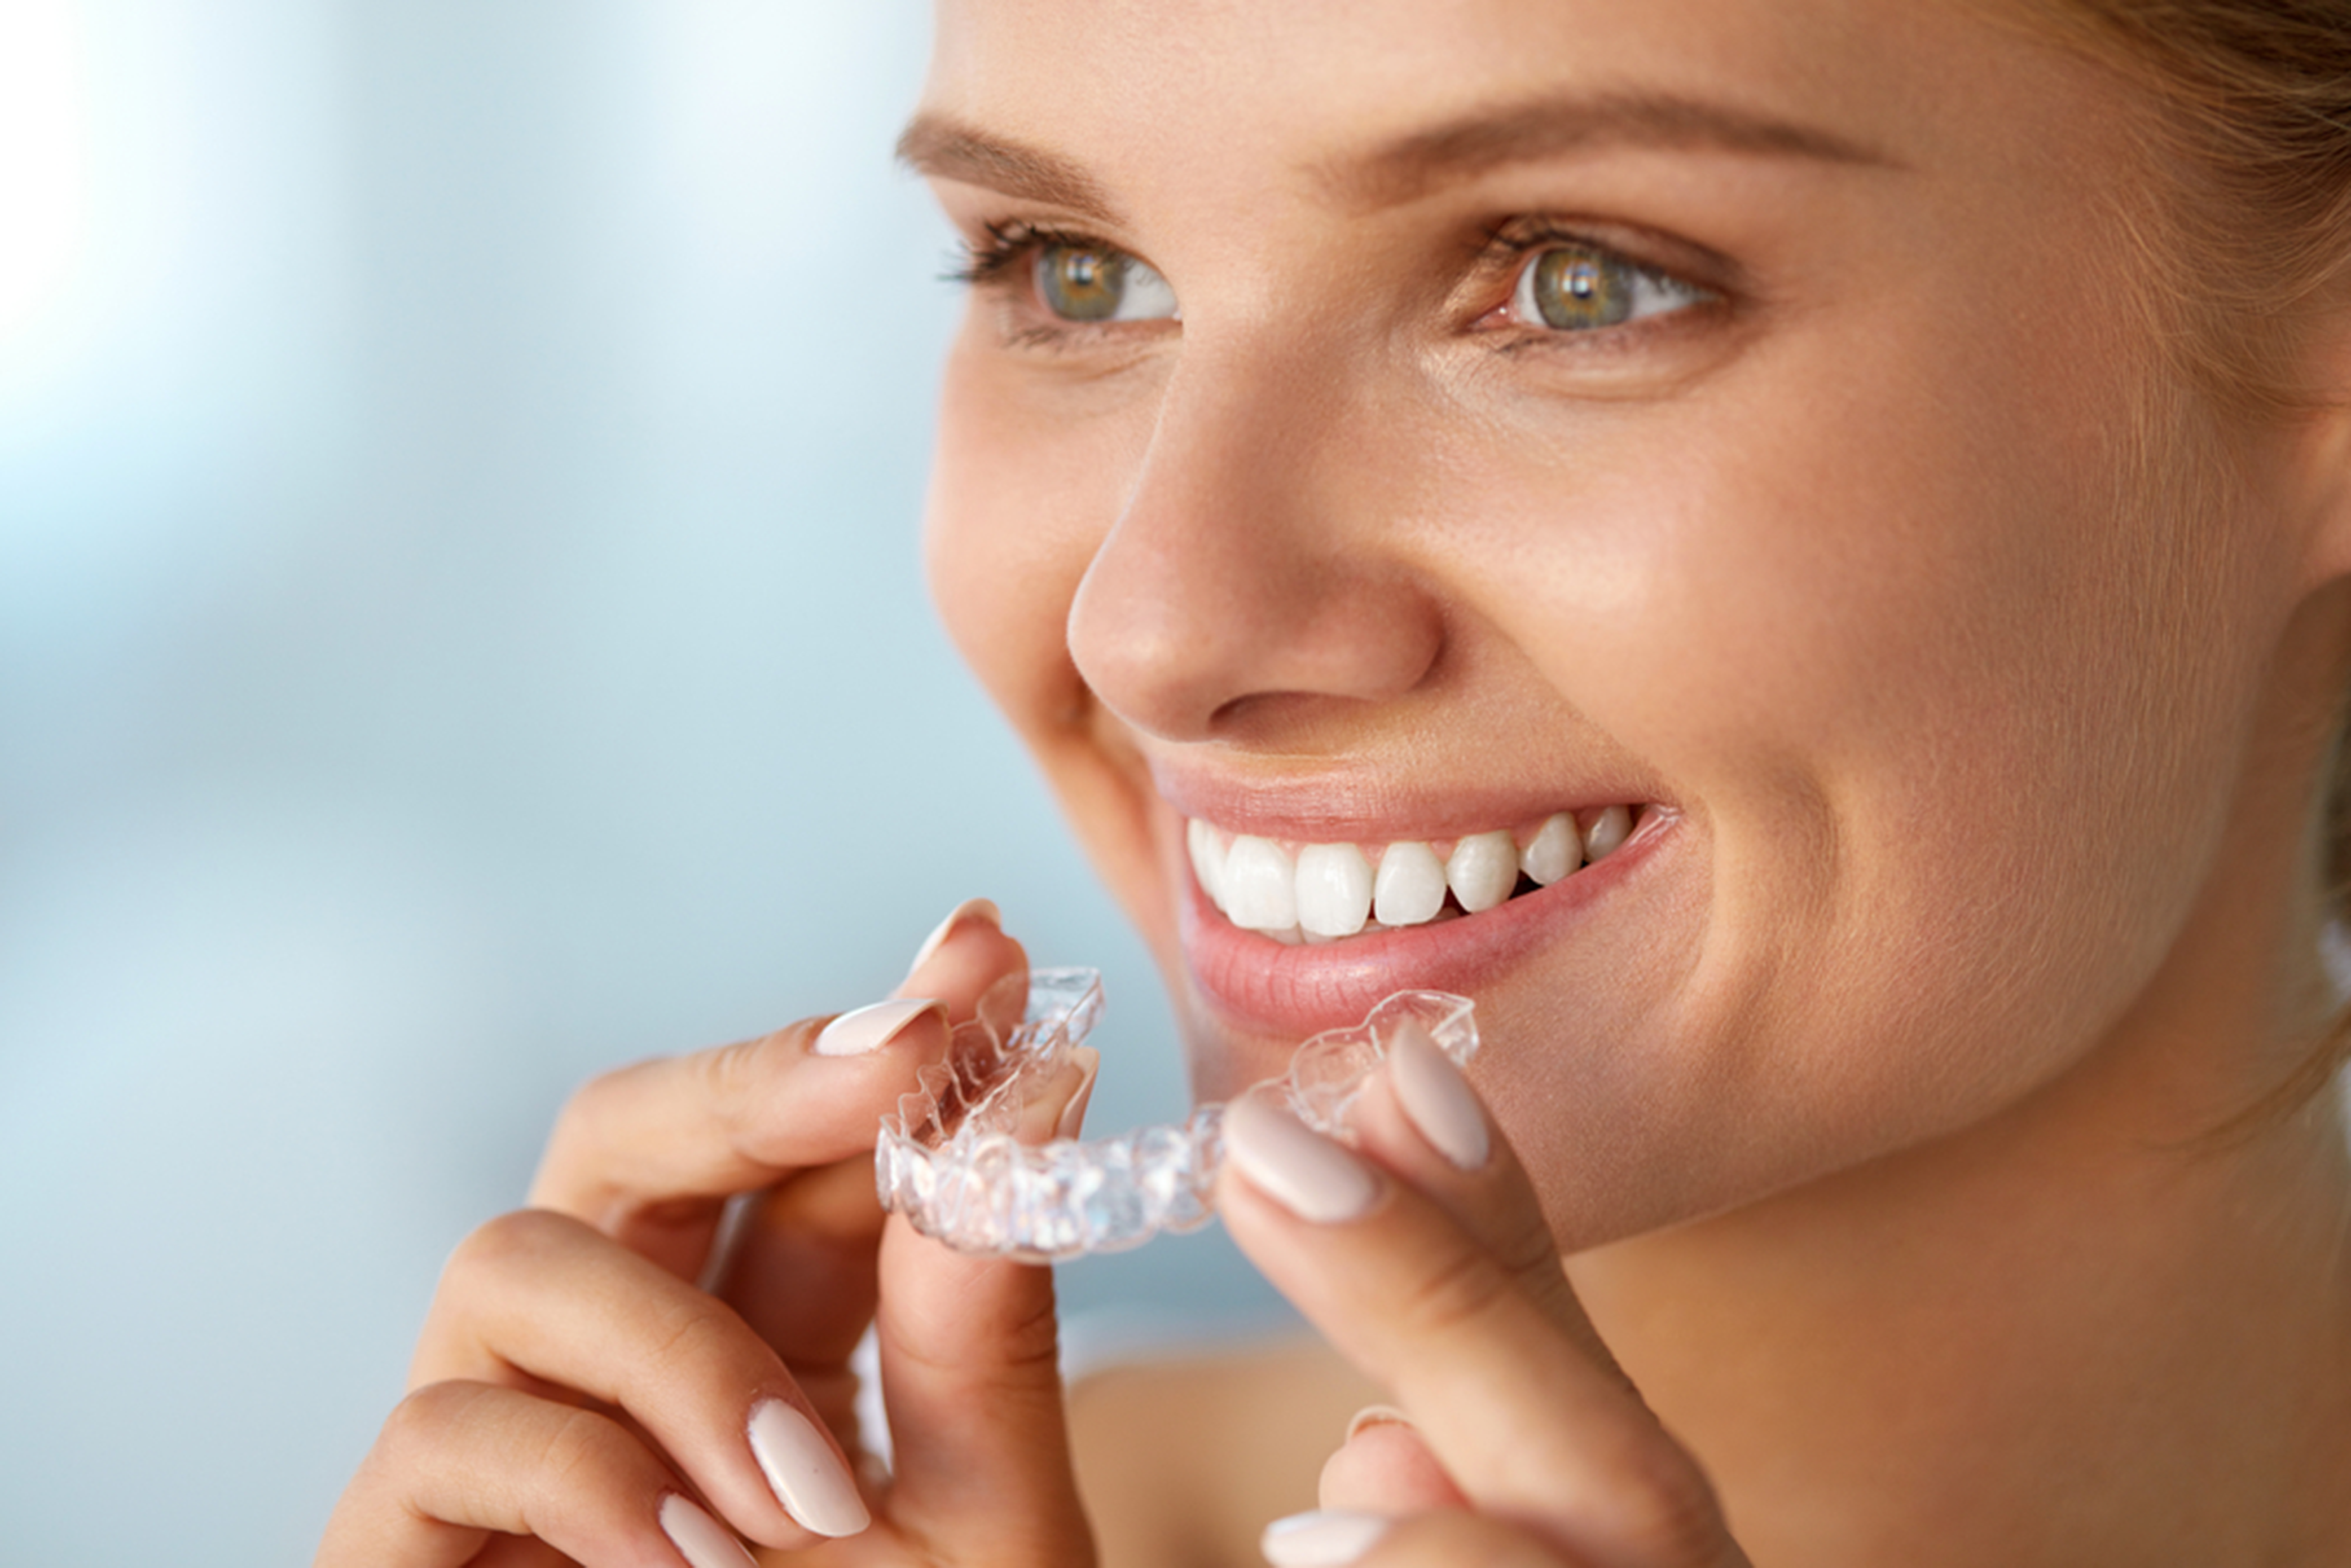 forget looks why else should you try invisalign